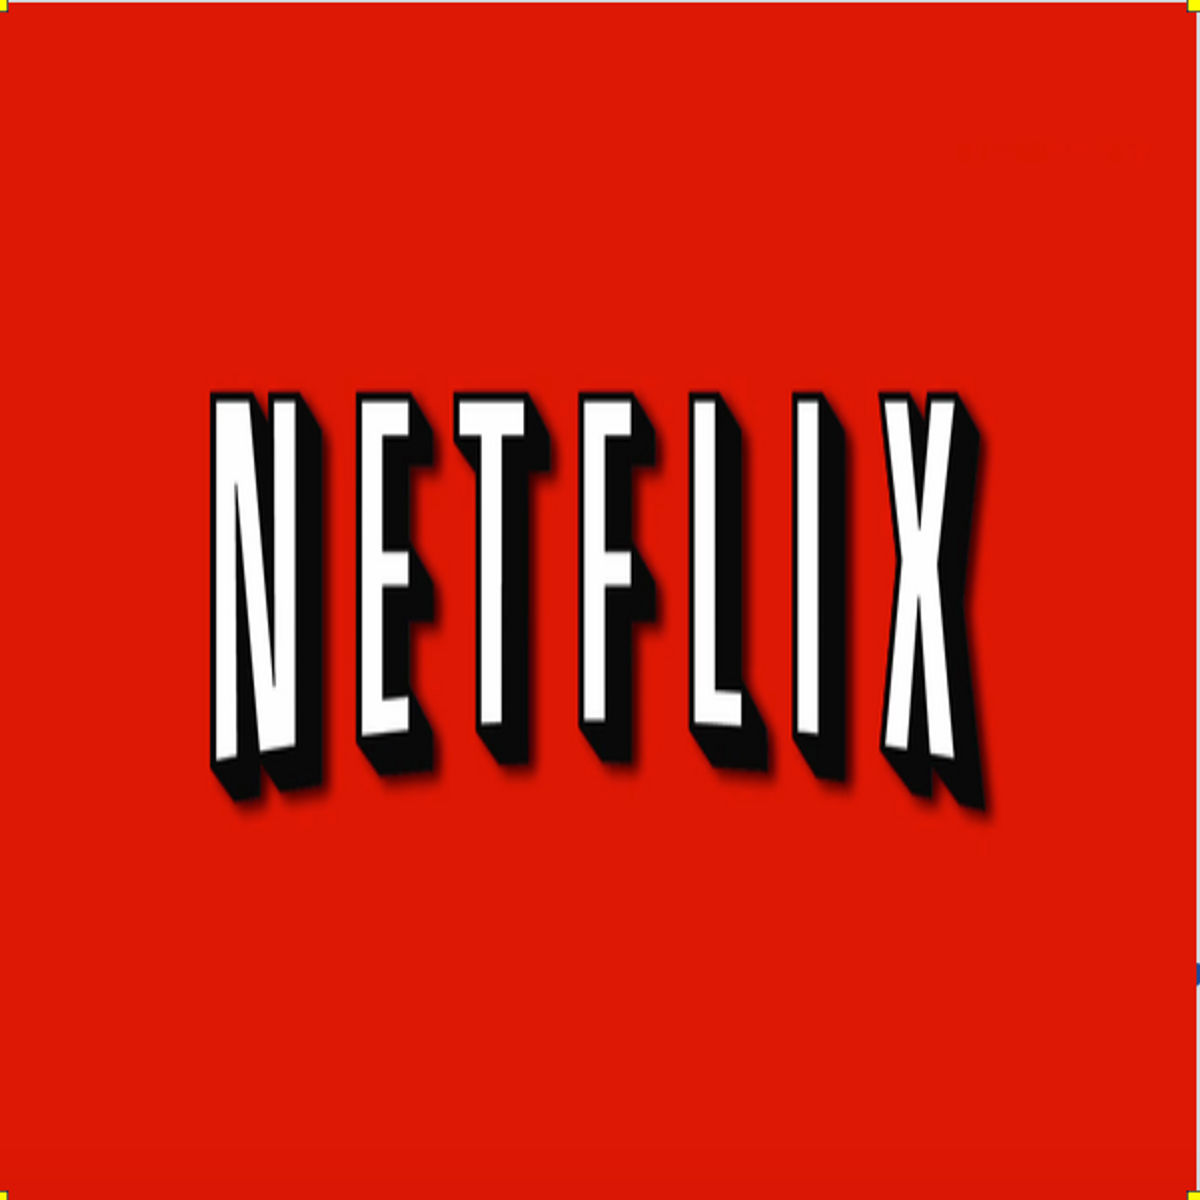 Top 5 Shows To Watch on Netflix This January